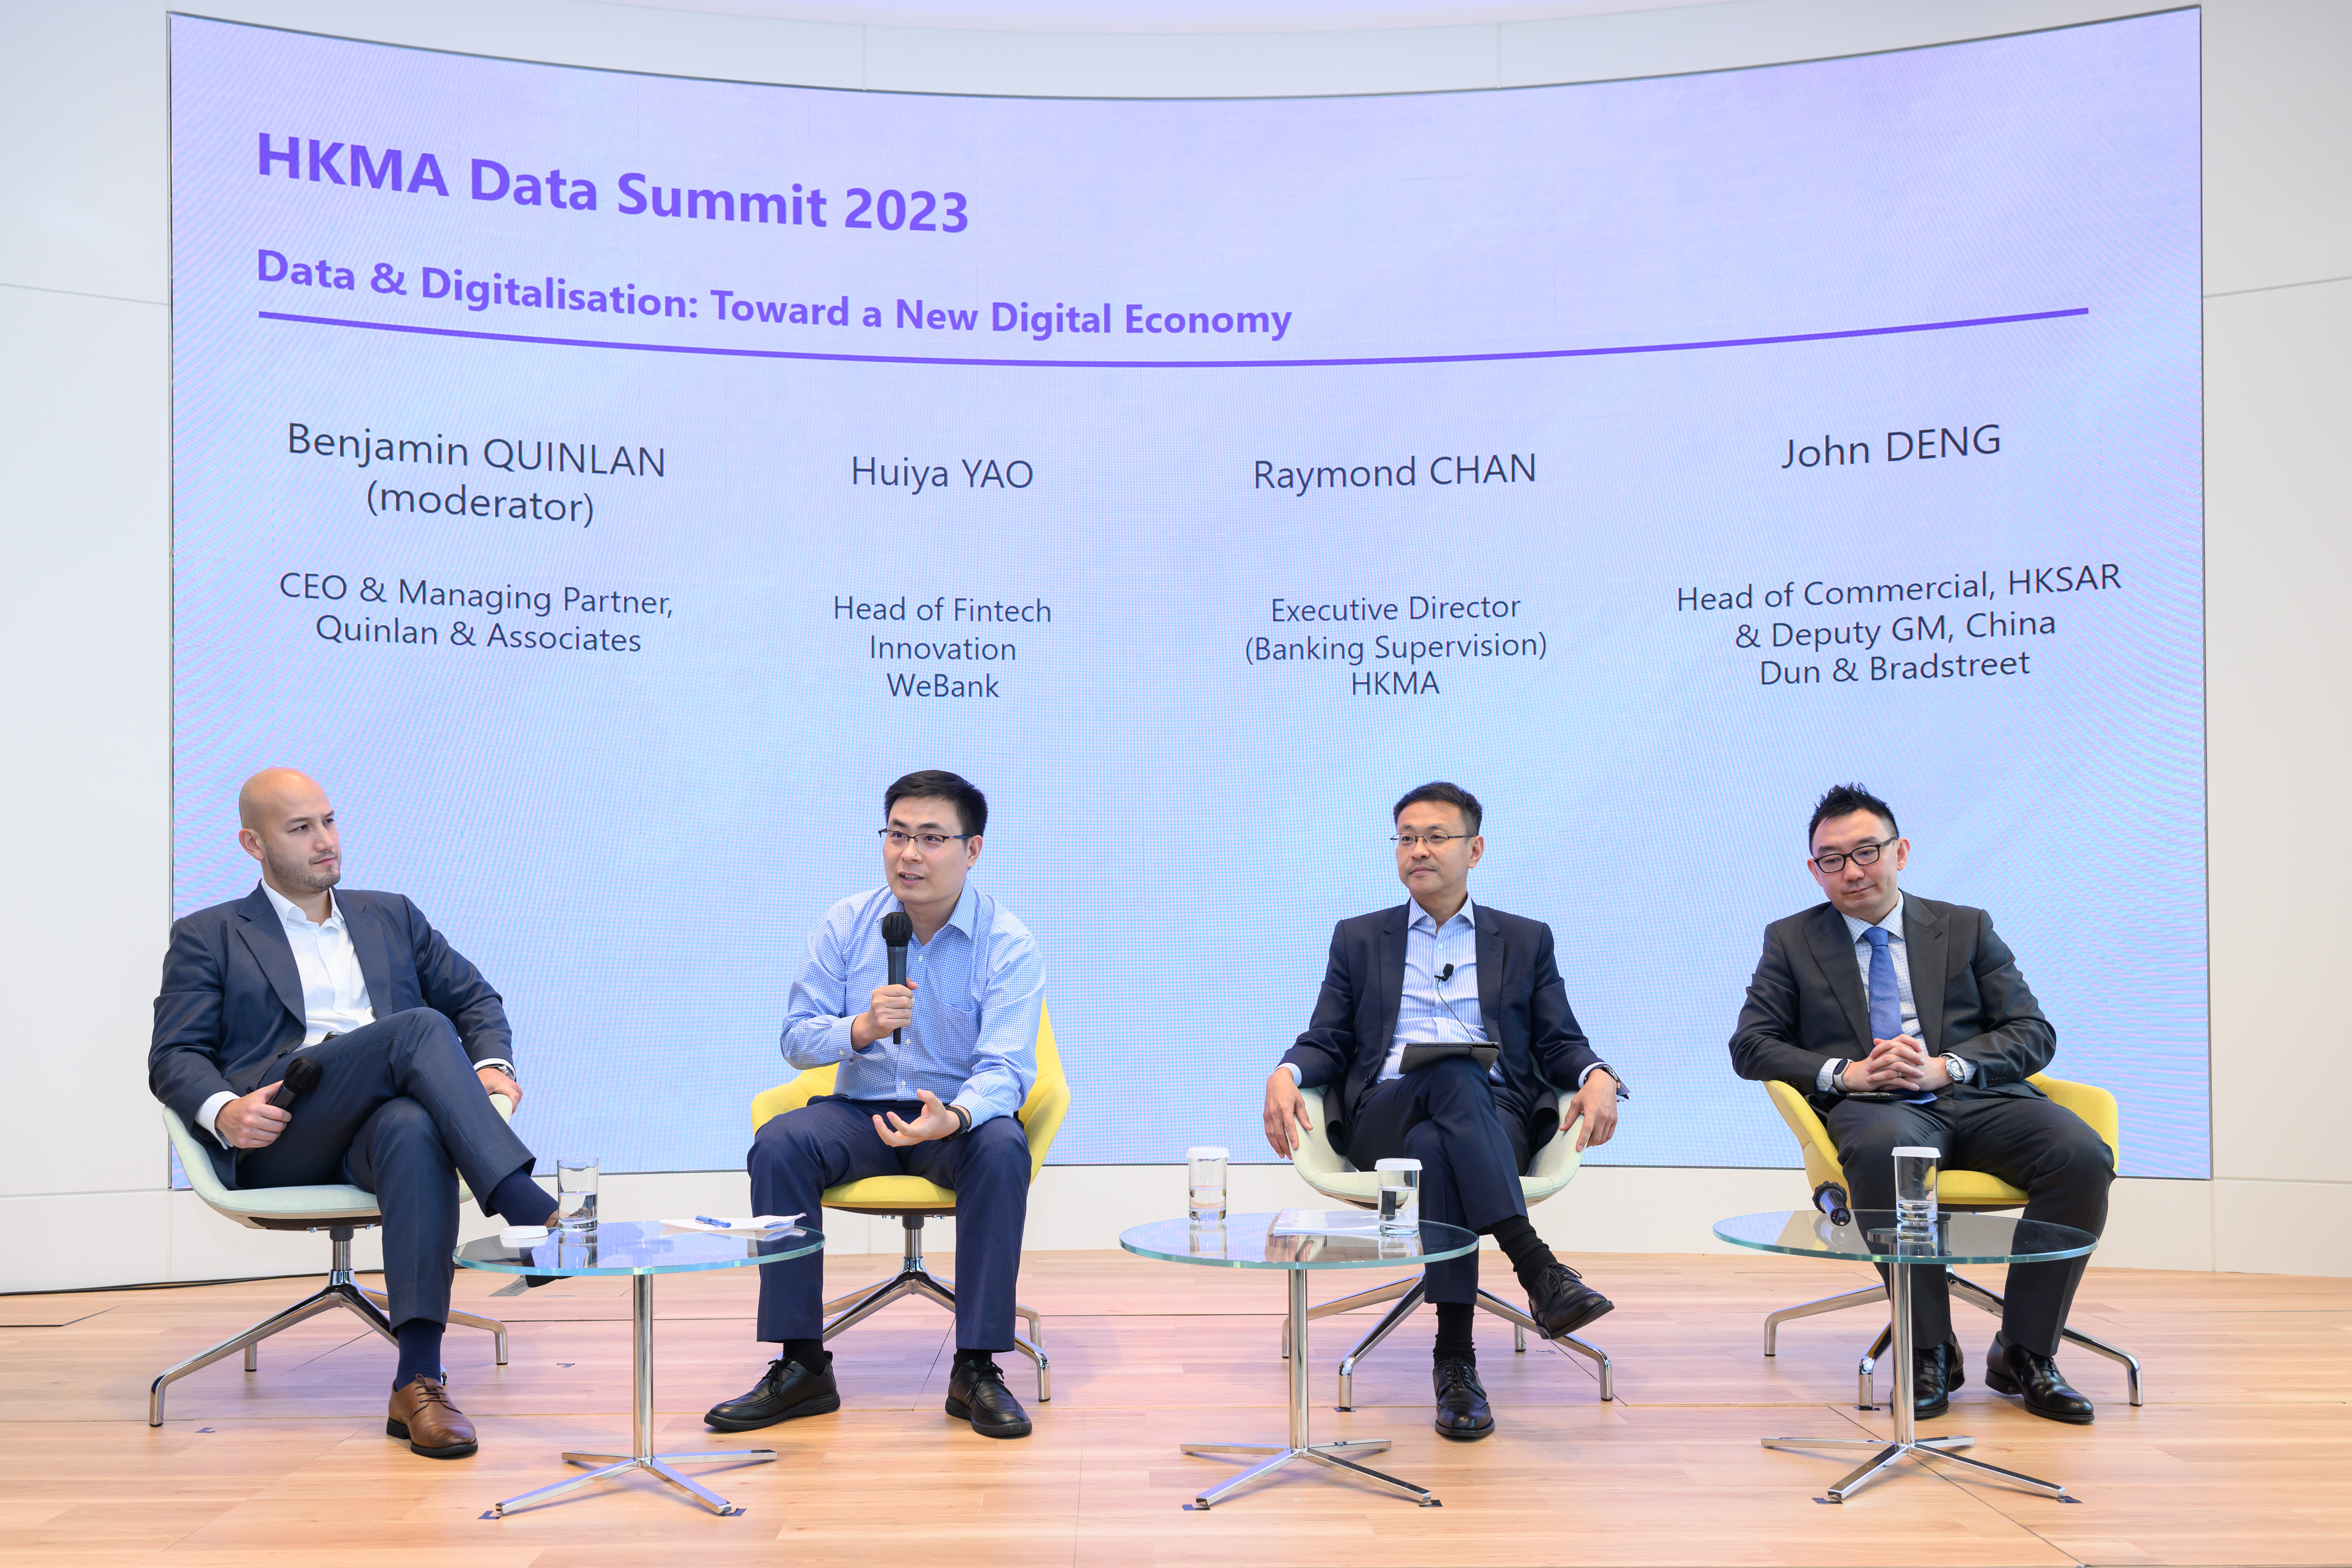 In the panel discussion titled “Data and Digitalisation: Towards a New Digital Economy”, Mr Raymond Chan, Executive Director (Banking Supervision) of the HKMA; Mr John Deng, Head of Commercial, HKSAR & Deputy General Manager, China of Dun & Bradstreet; and Mr Huiya Yao, Head of Fintech Innovation of WeBank, share their views on how the financial services industry can seize the opportunity and strengthen its digital capabilities.